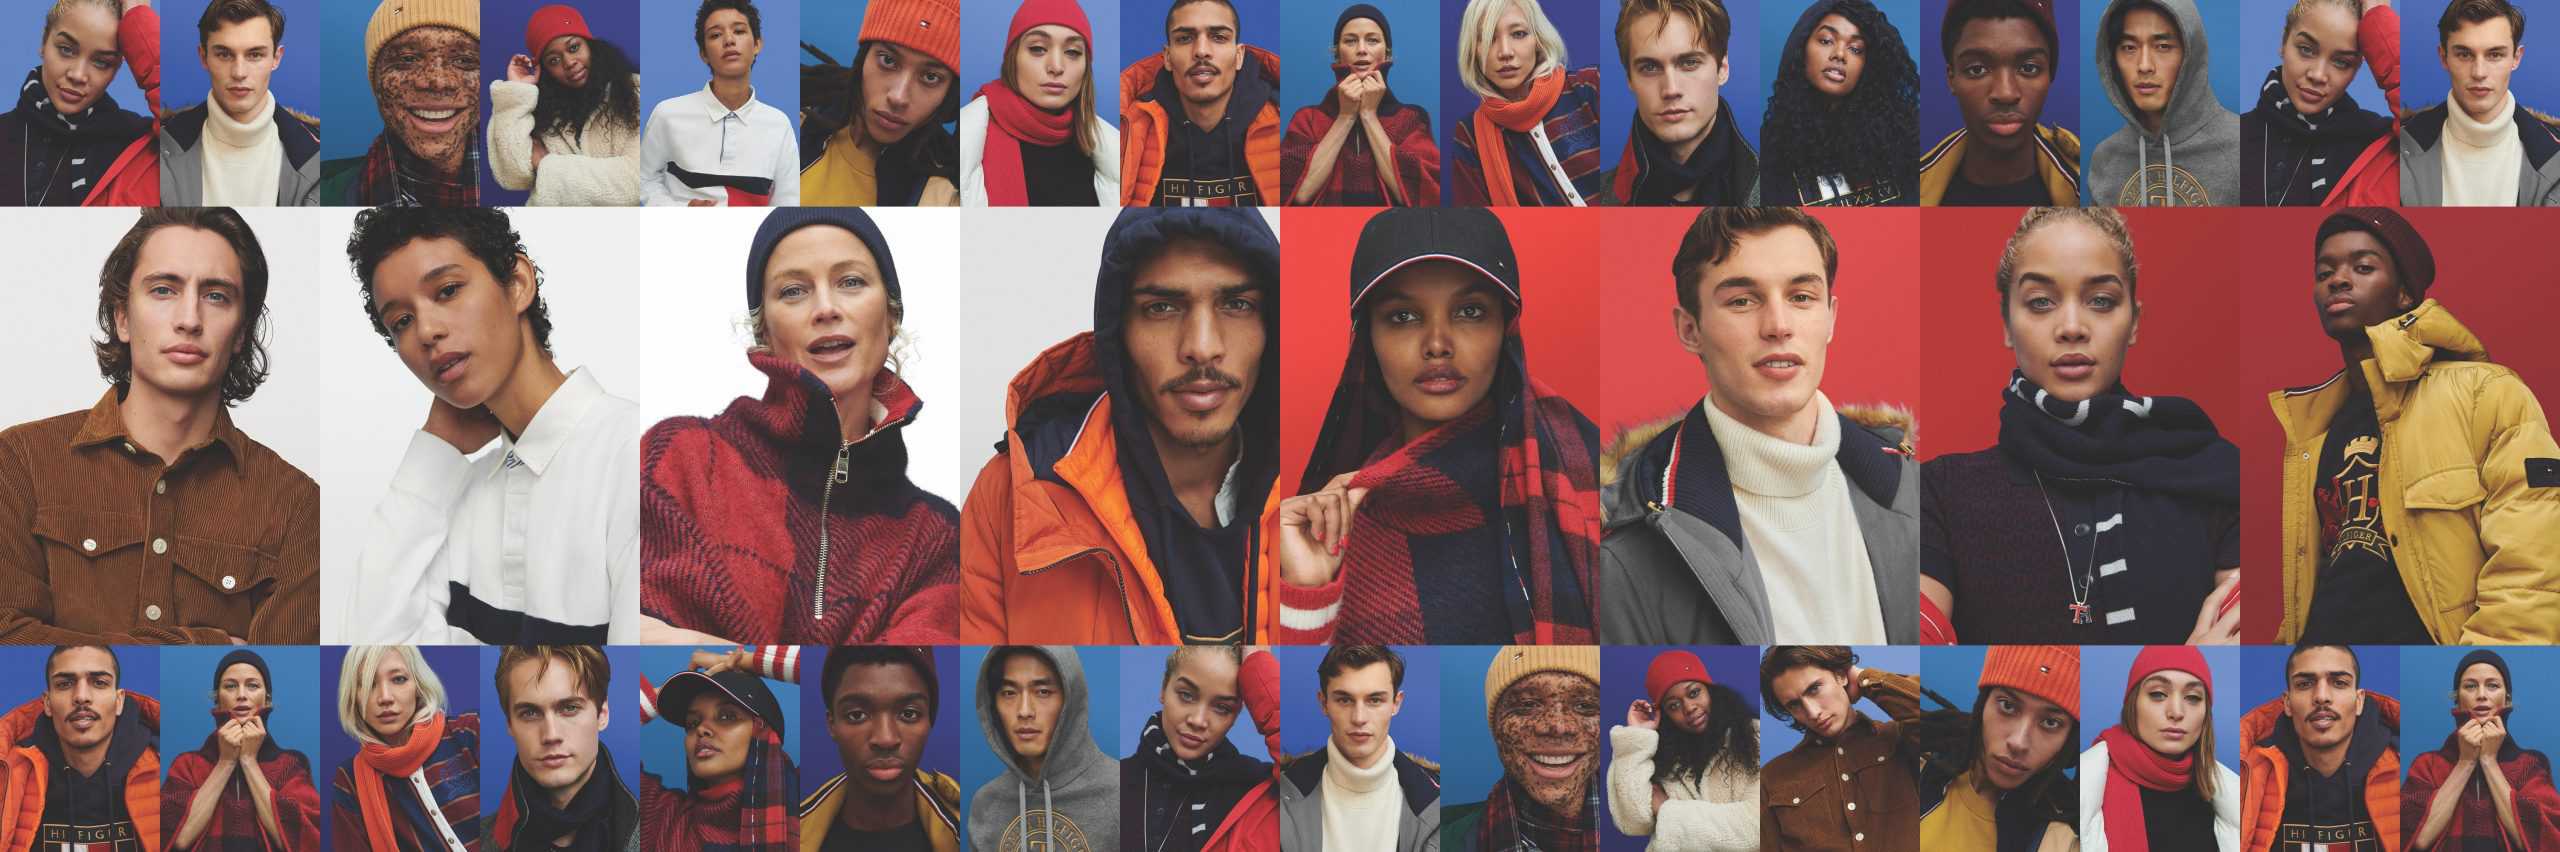 Tommy Hilfiger's Fall 2020 Campaign is More Than Just an Ad